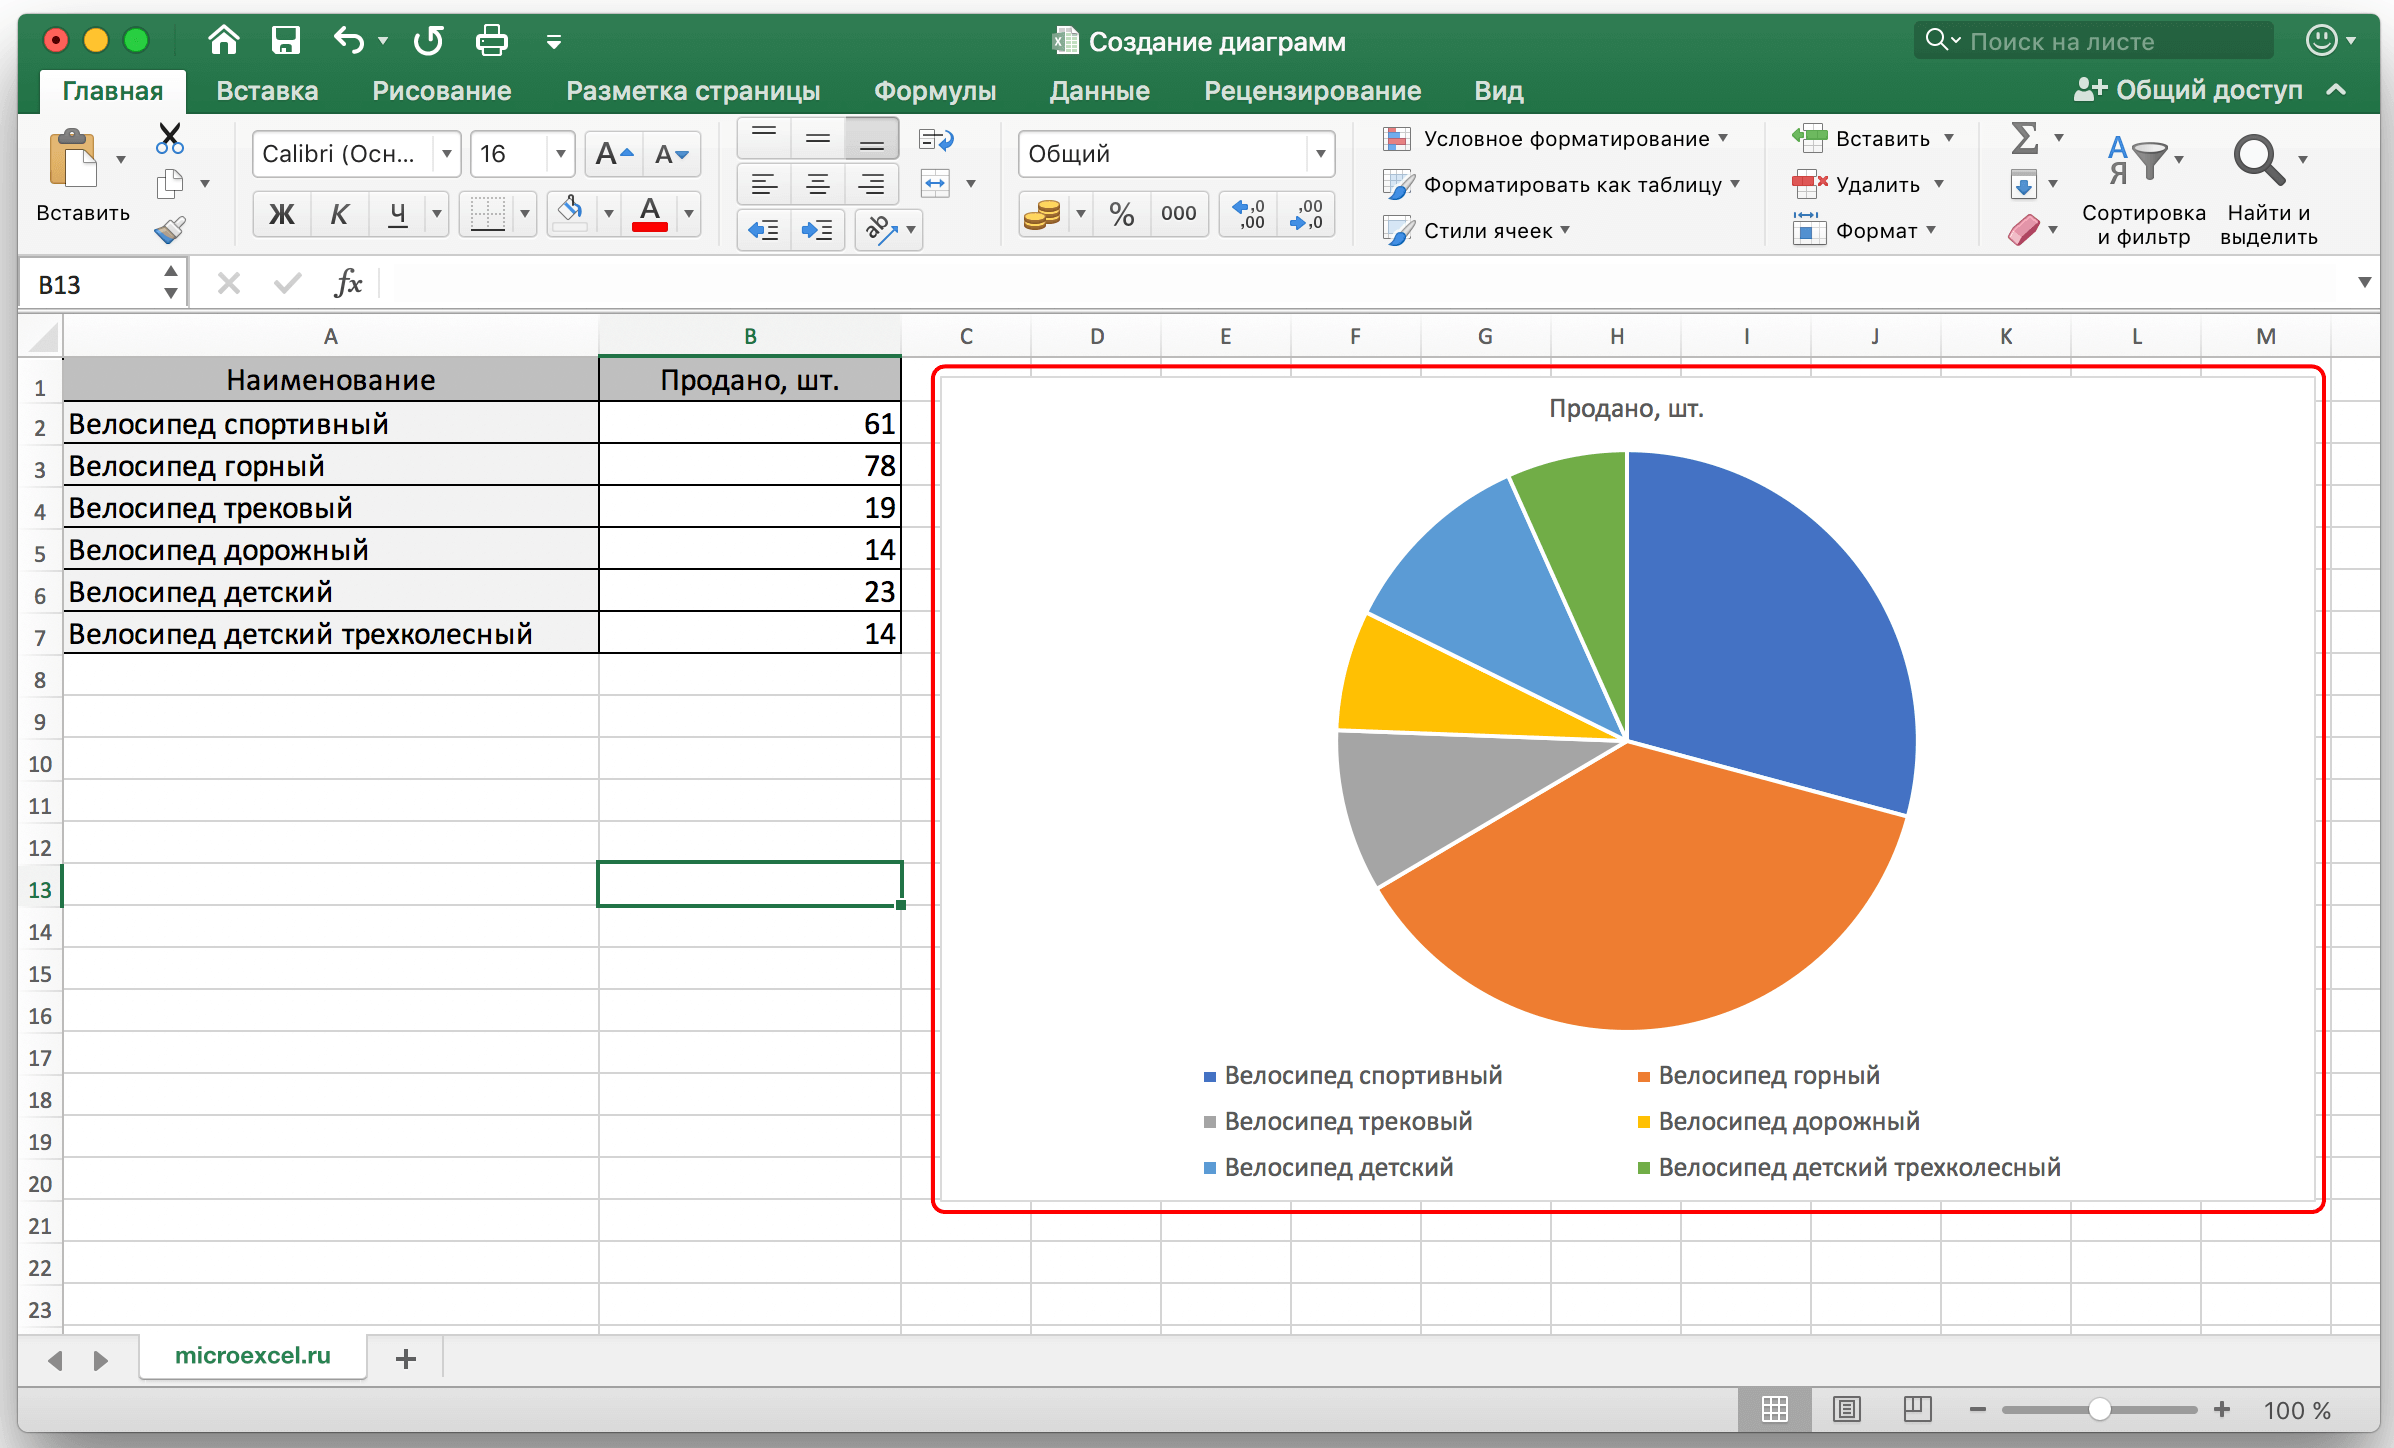 All about creating a chart in Excel. Step by step guide with screenshots